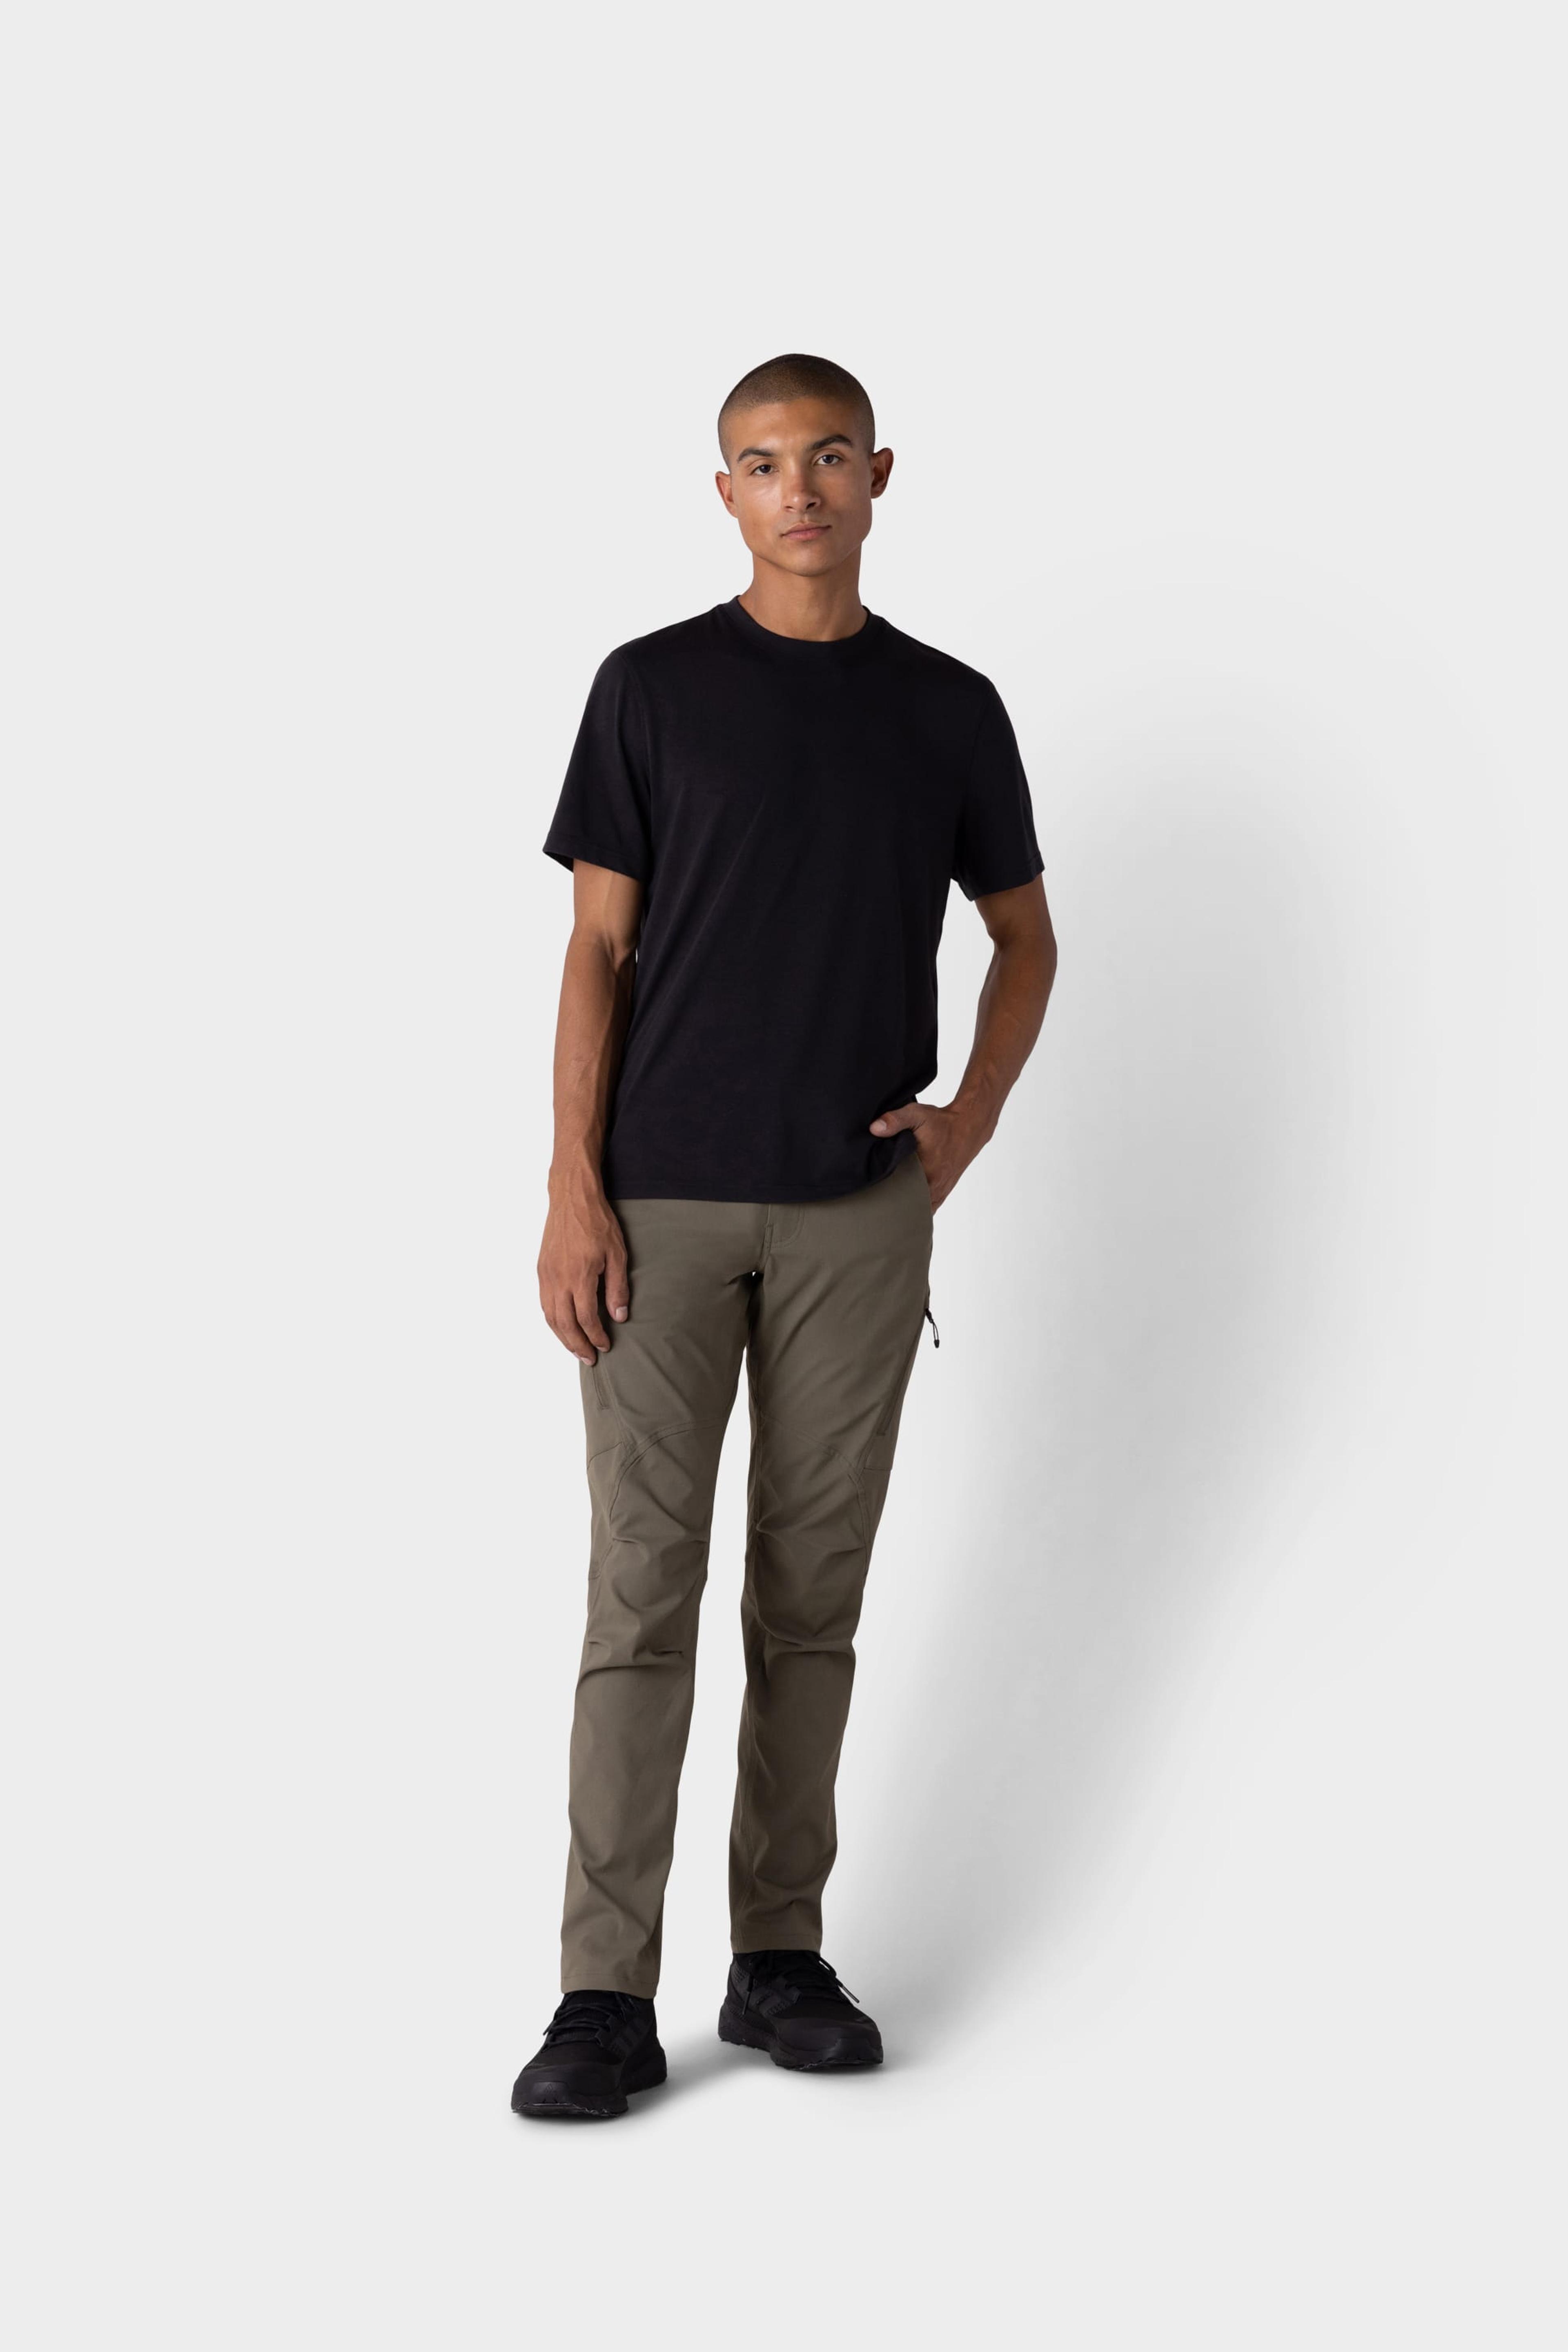 Alternate View 79 of 686 Men's Anything Cargo Pant - Slim Fit